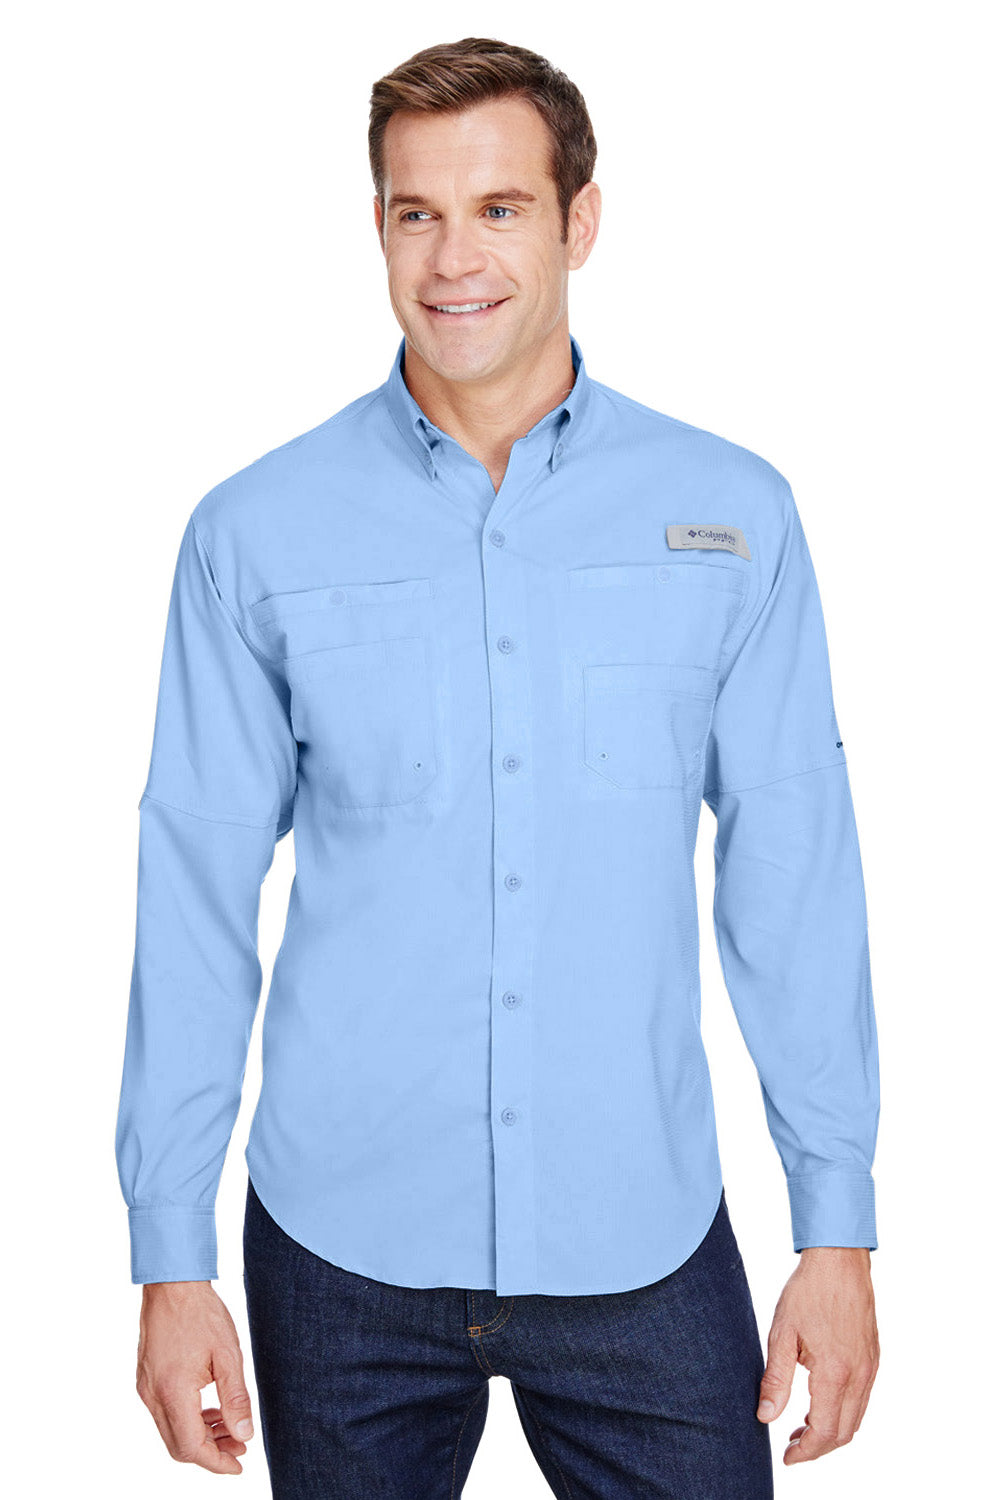 Columbia 7253 Mens Tamiami II Moisture Wicking Long Sleeve Button Down Shirt w/ Double Pockets Sail Blue Front